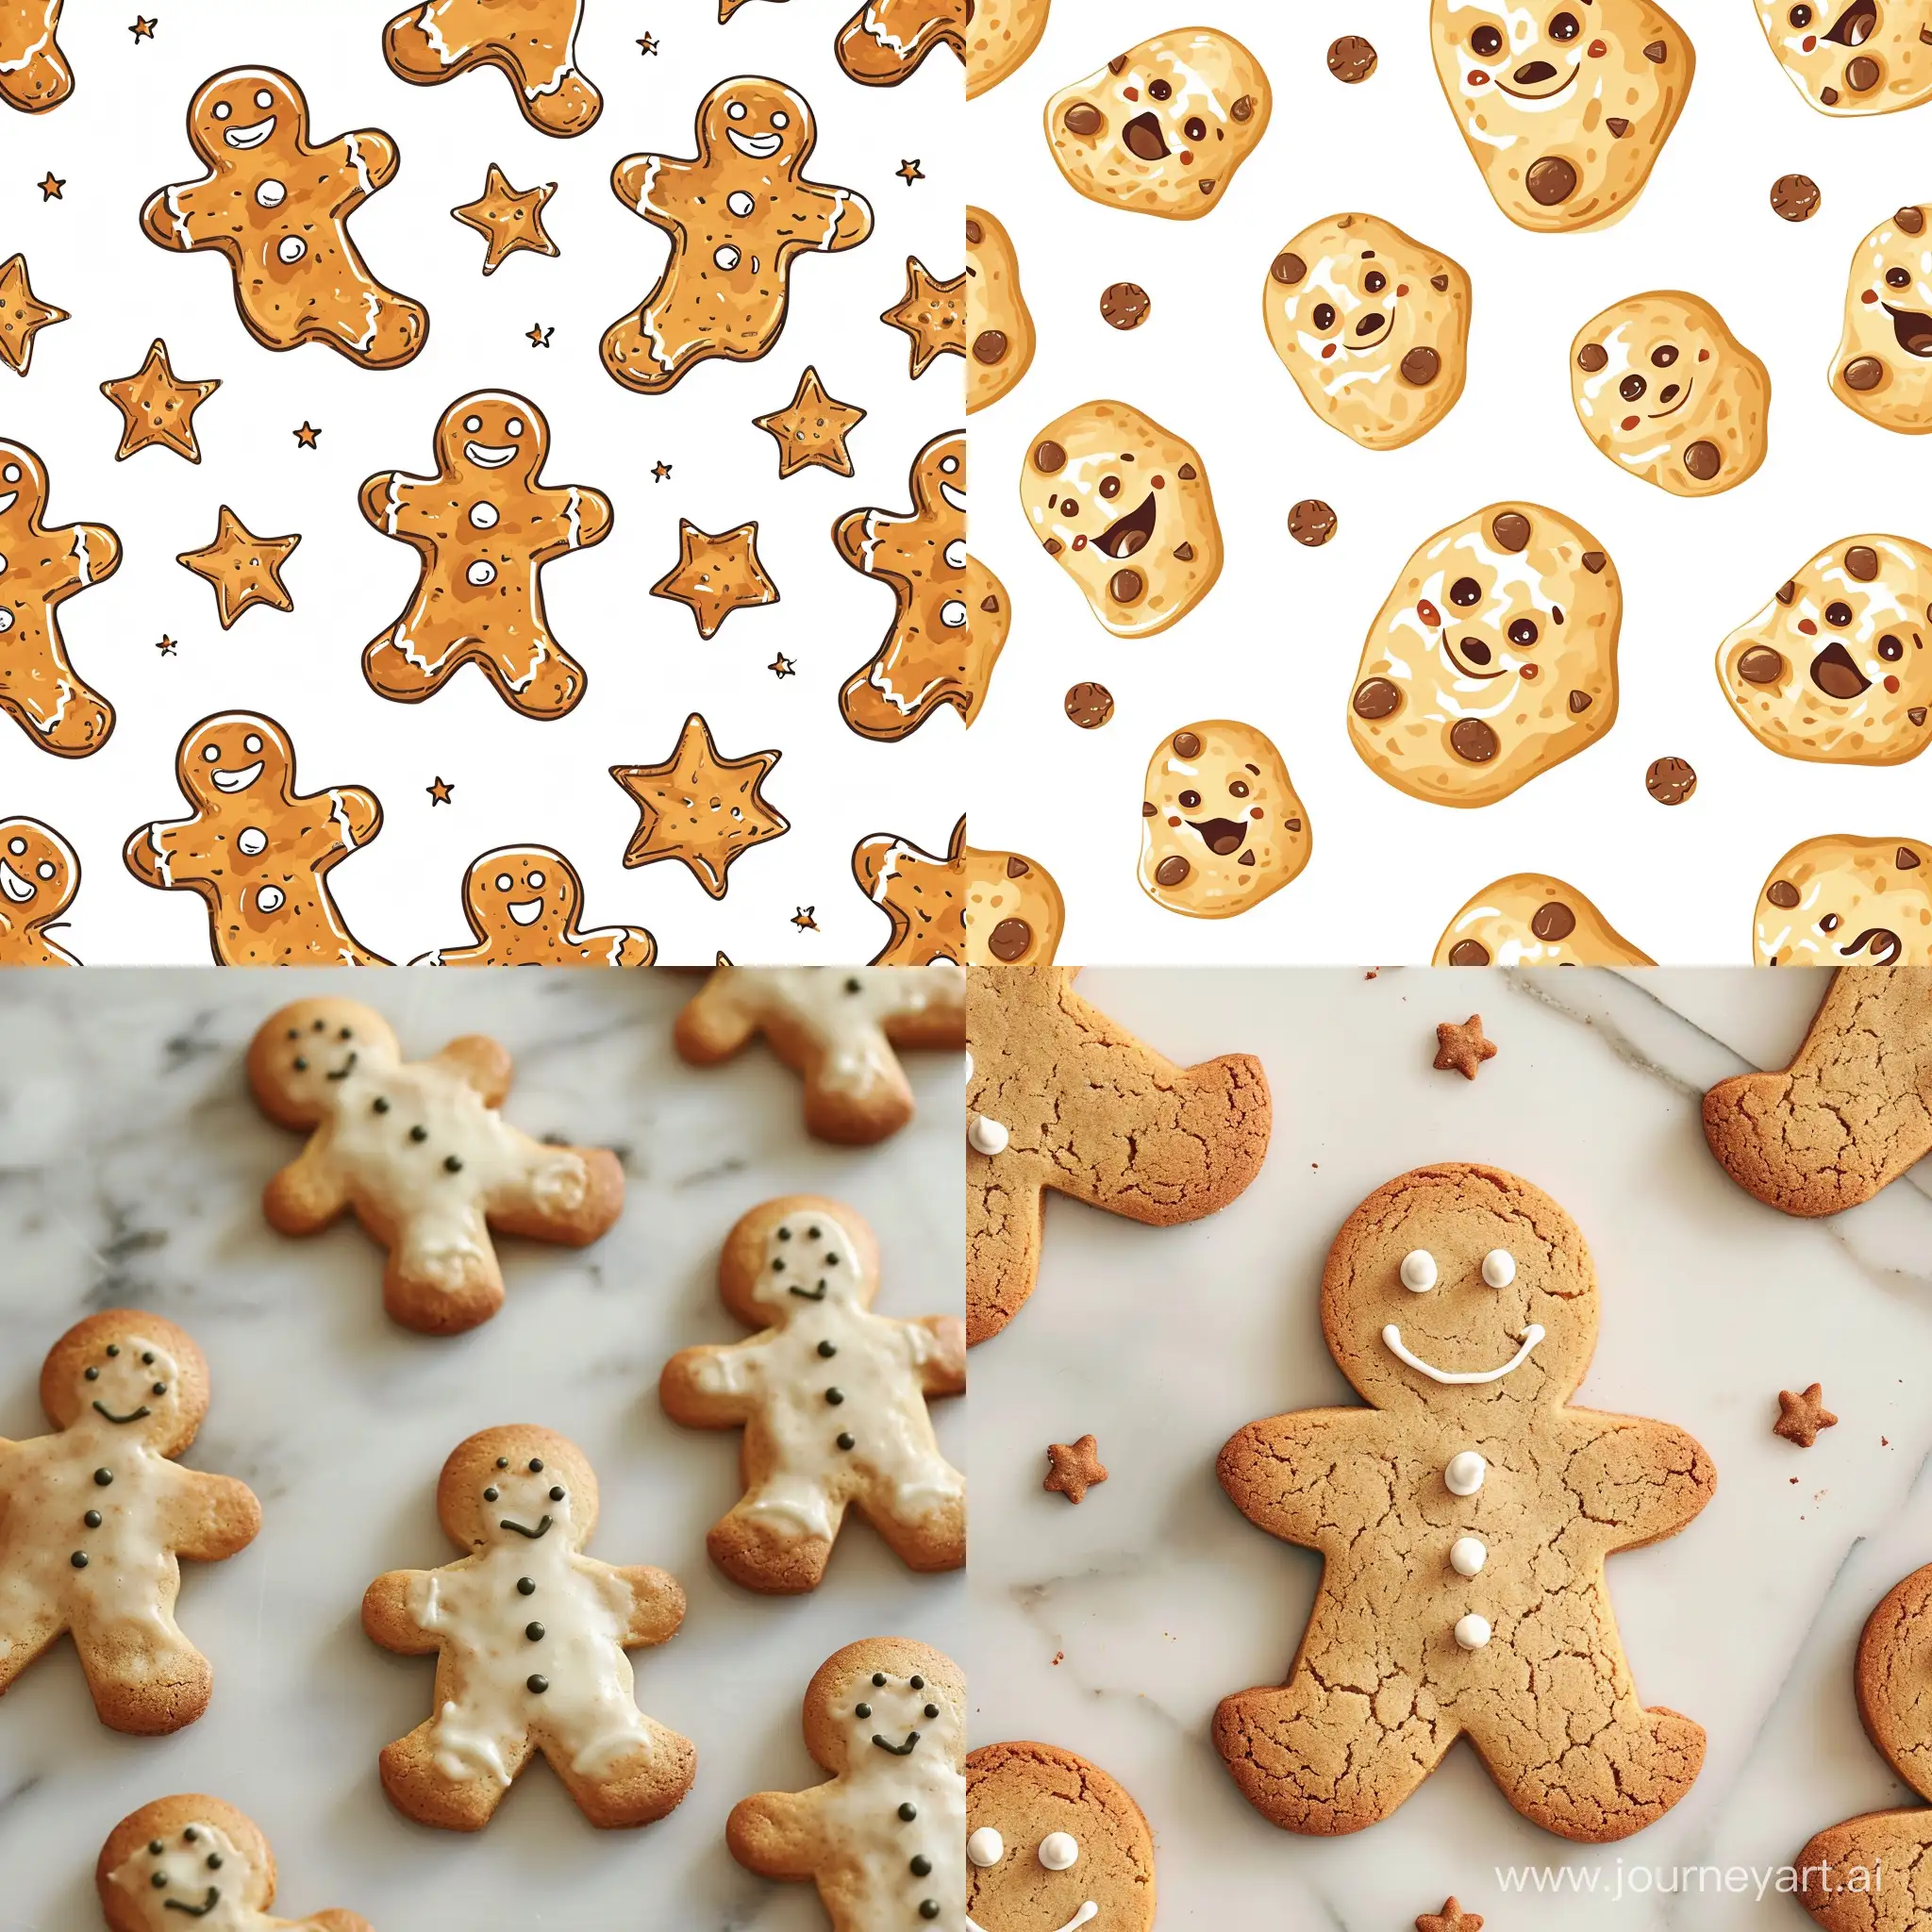 Charming-Cookie-Man-Pattern-Whimsical-Delight-for-Creative-Baking